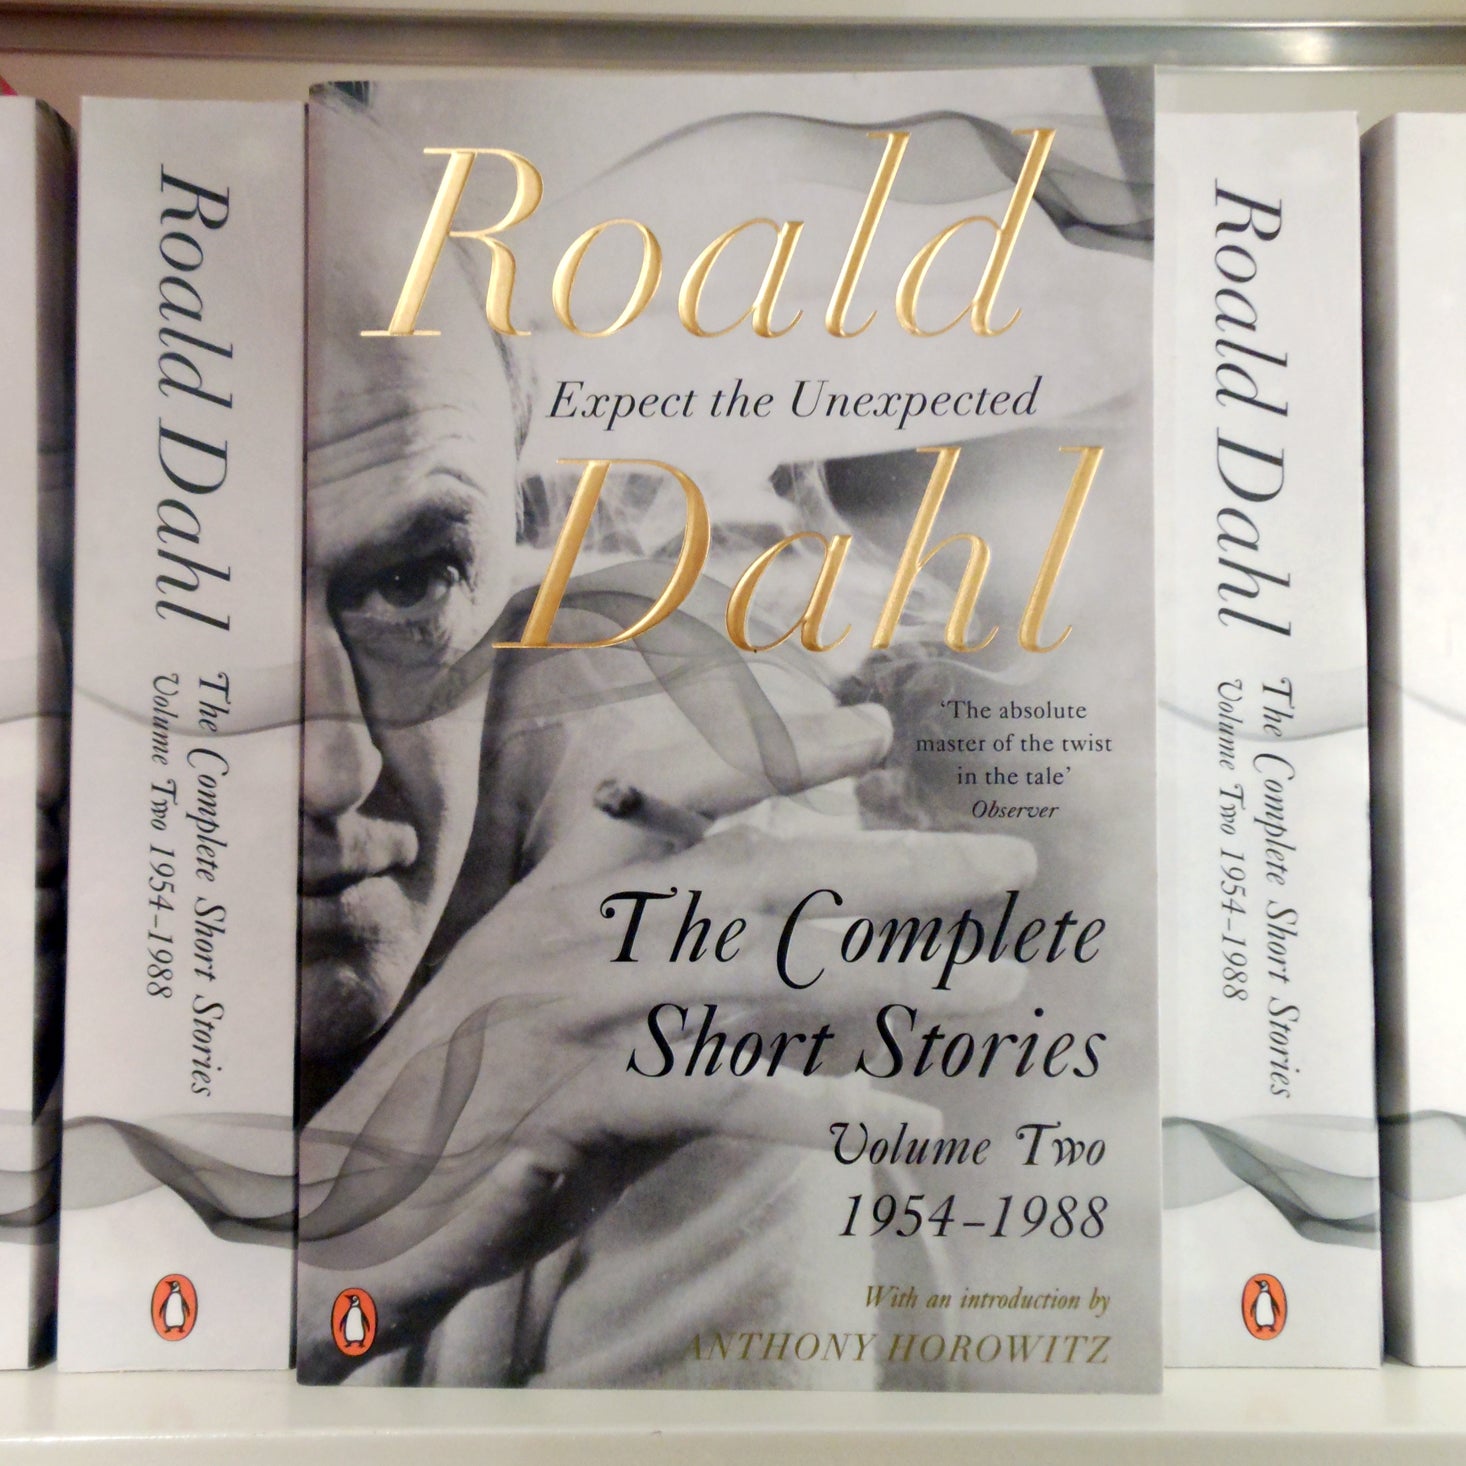 The Complete Short Stories Volume Two by Roald Dahl